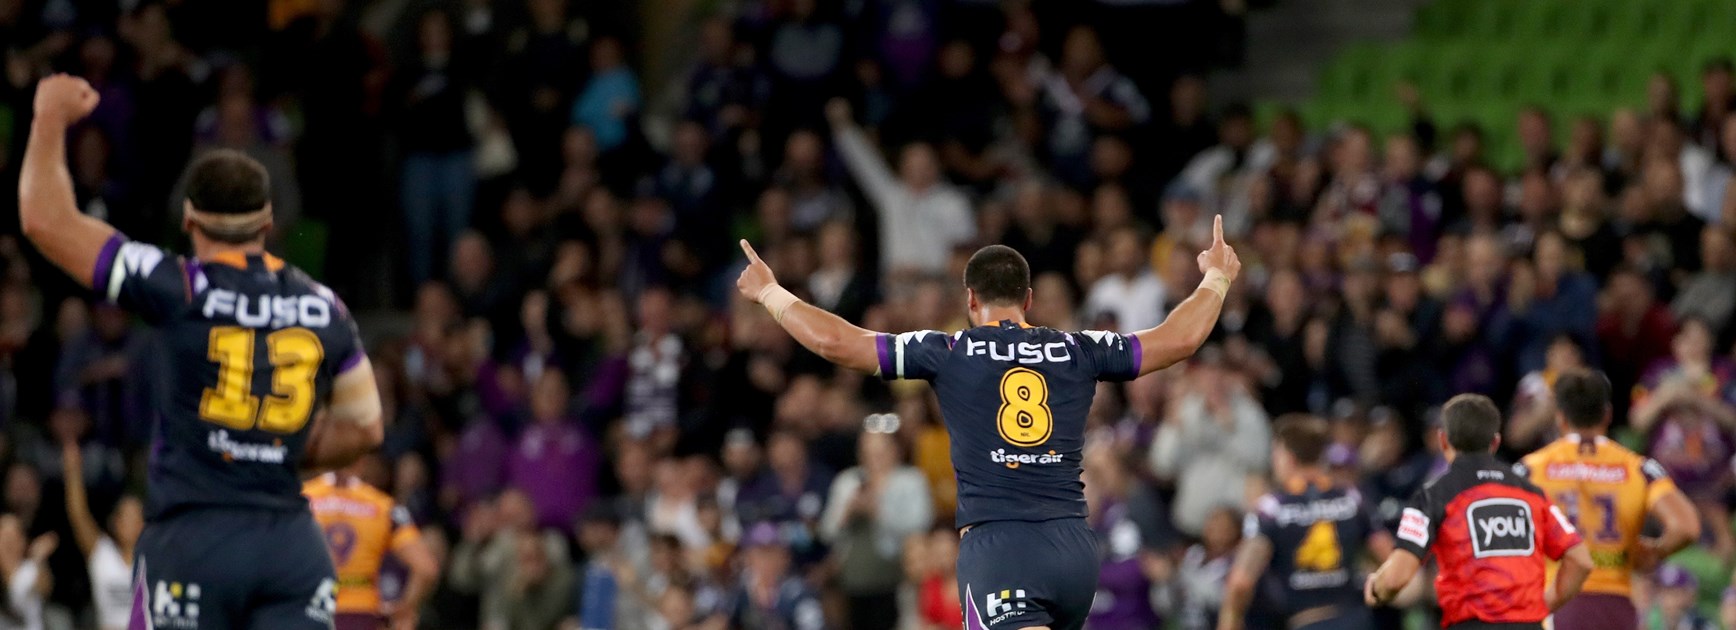 Jesse Bromwich deals with "stupid mistake", follows with big try